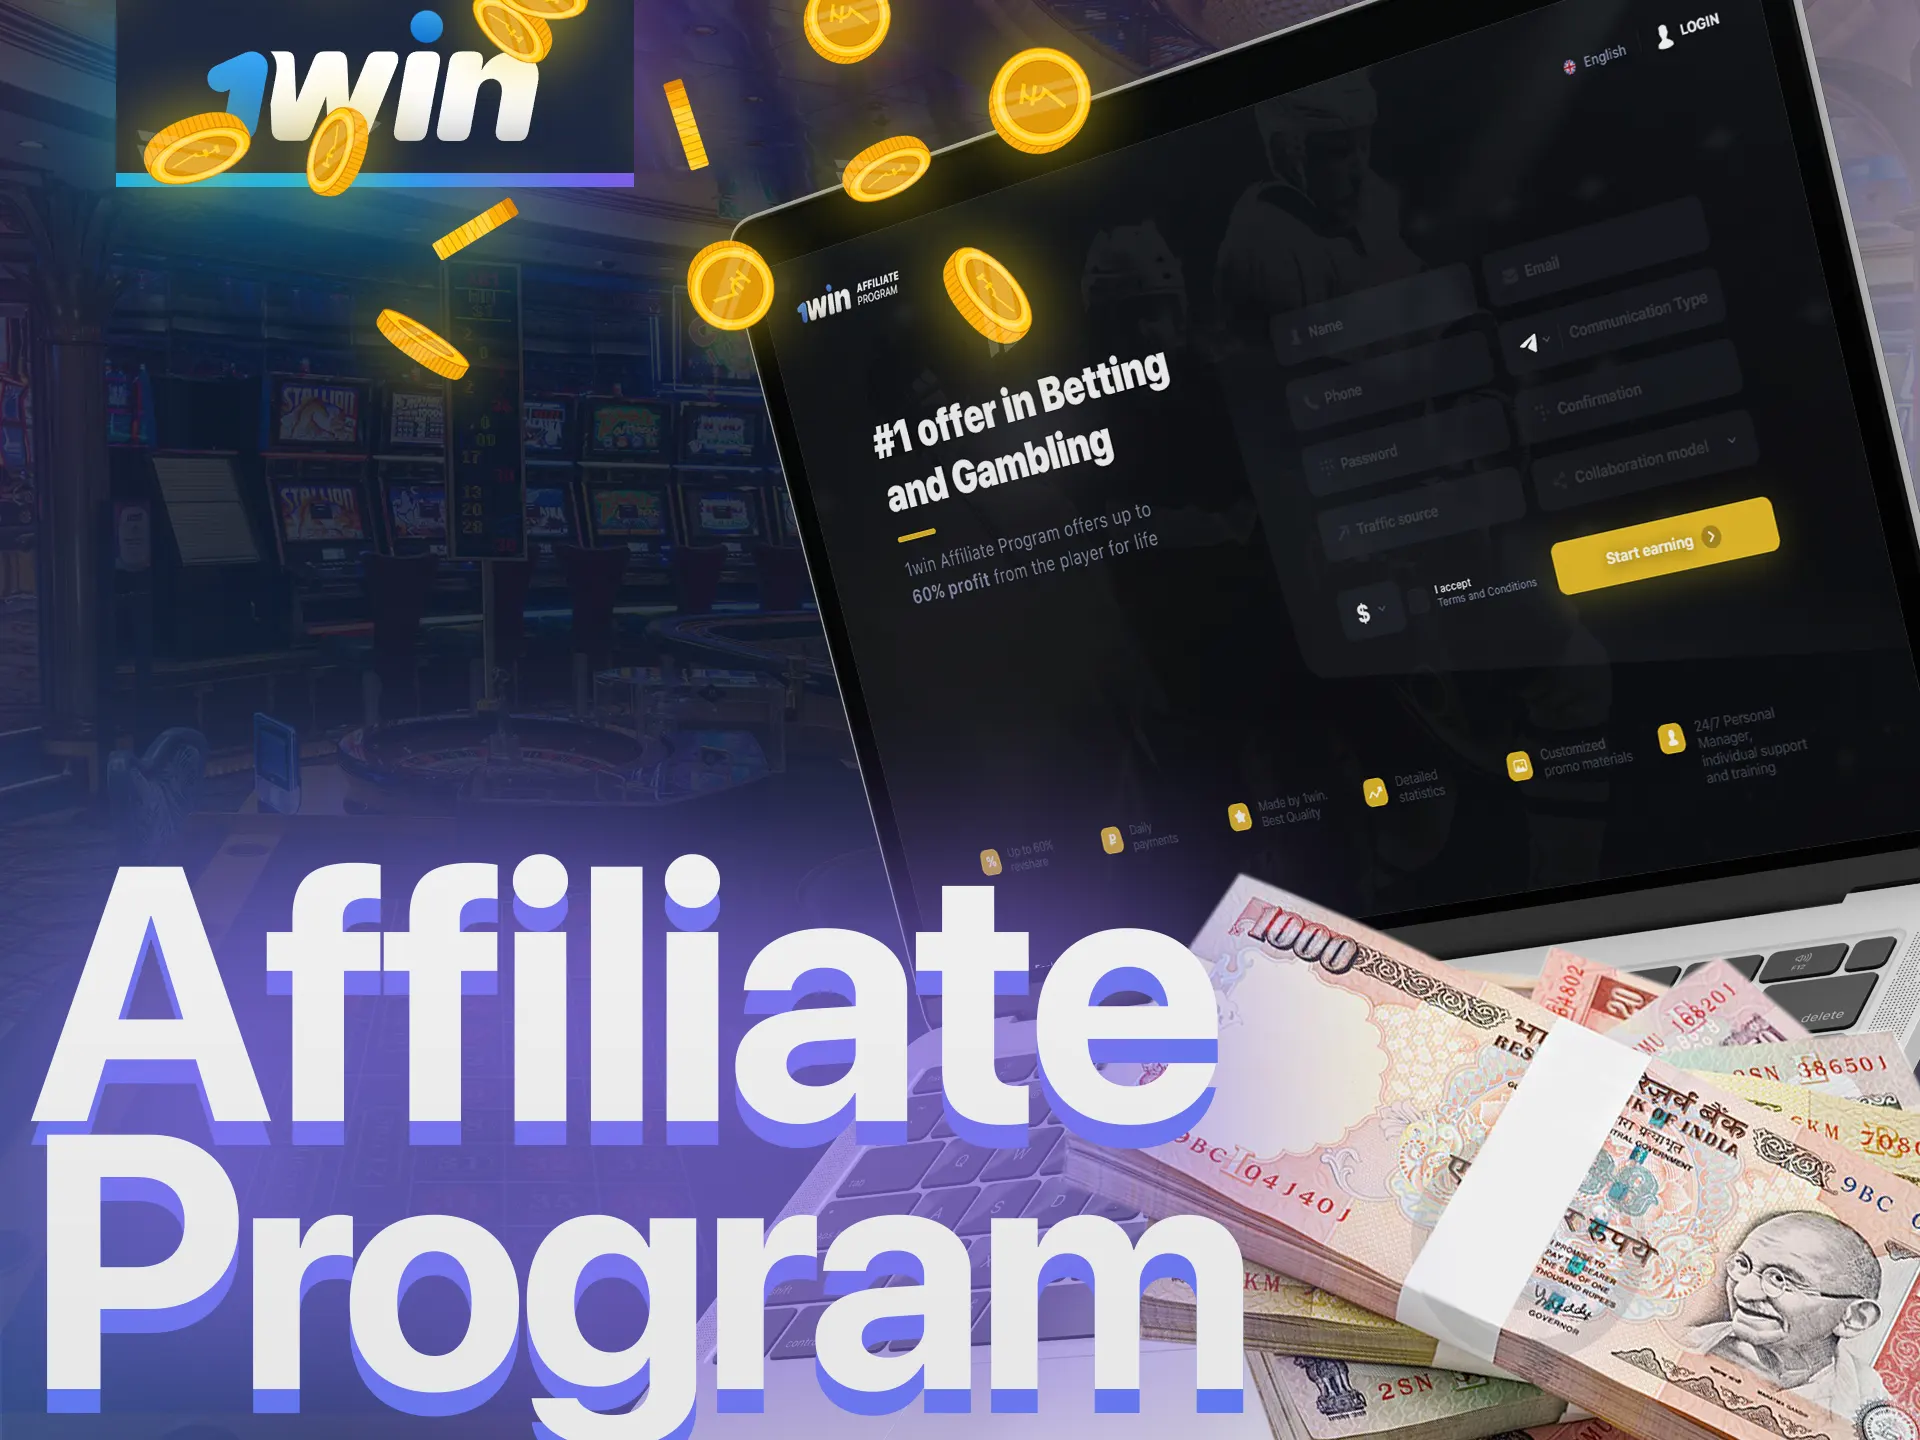 Affiliates who bring new users to the site can earn a significant commission.